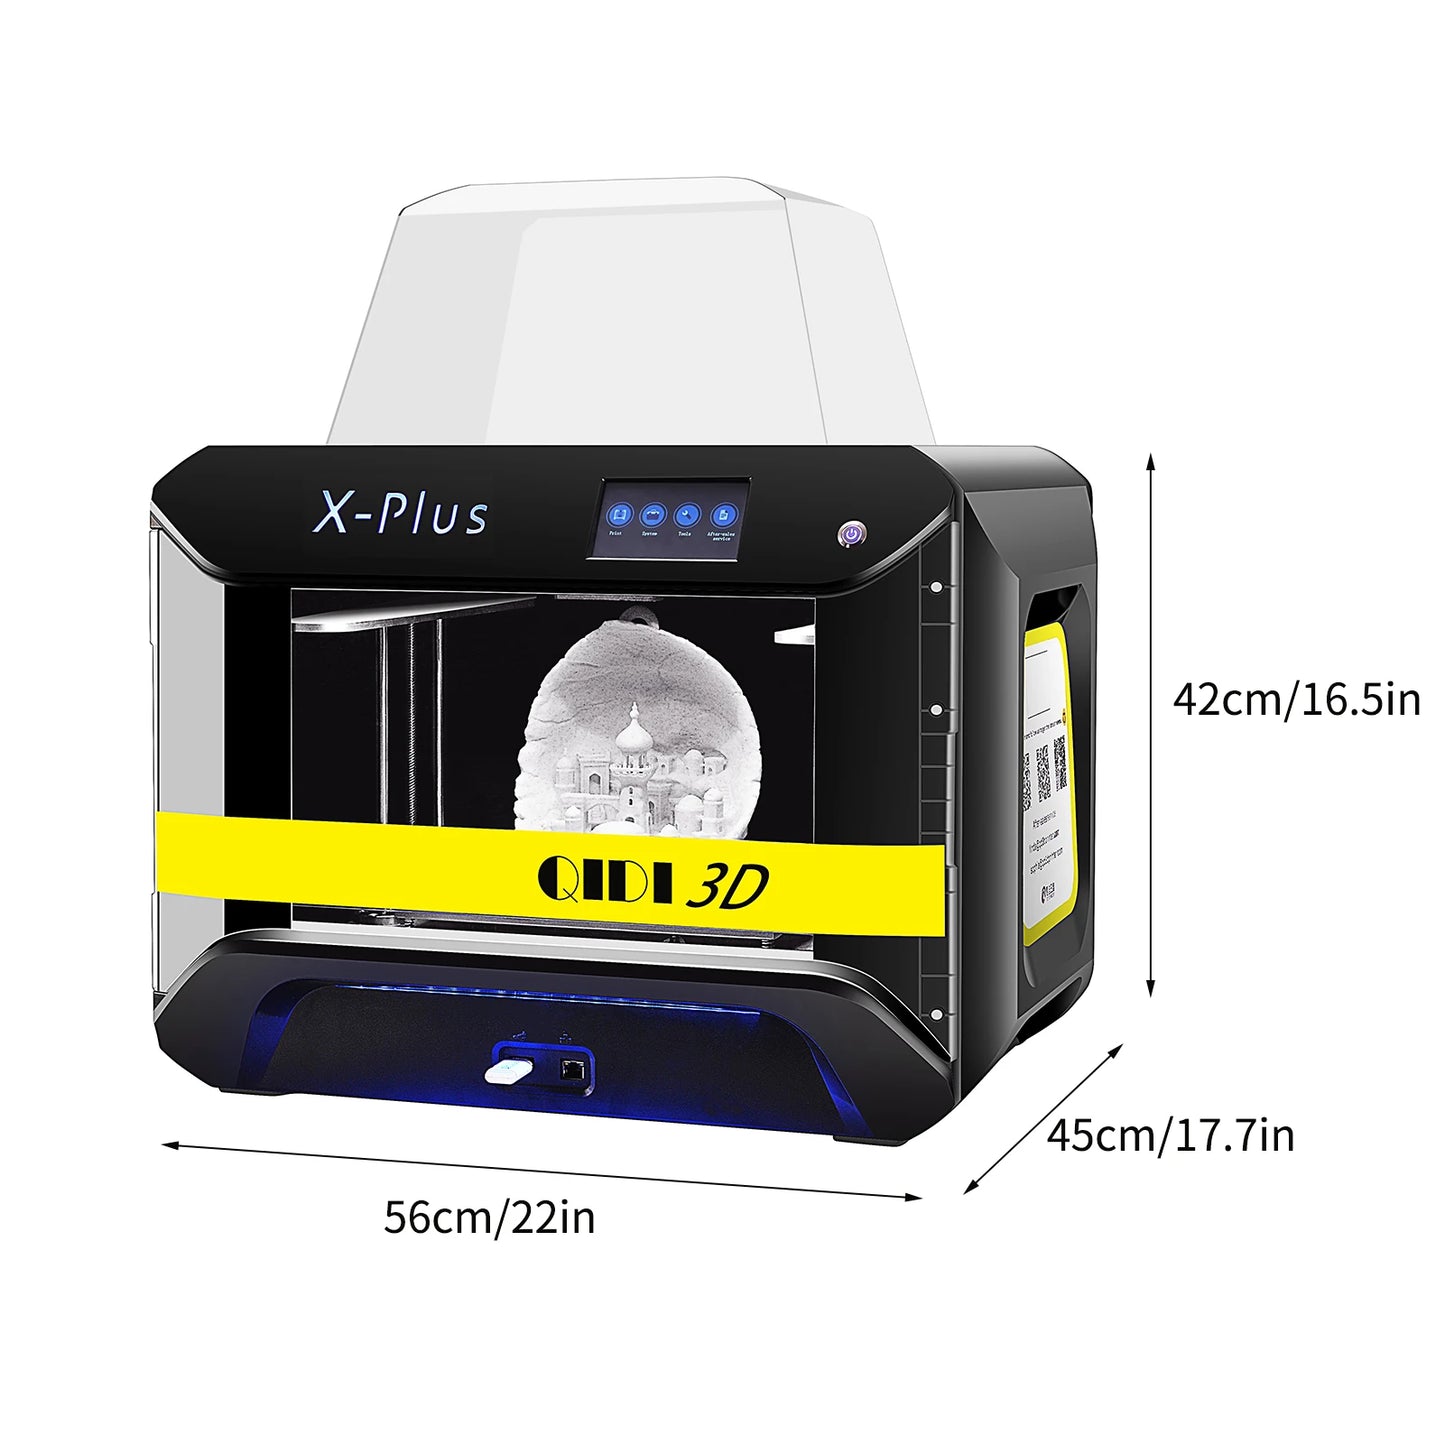 3D Printer Industrial Grade with 4.3In Color Touchscreen Support Resume Printing Quick Leveling WiFi Function Air Purification